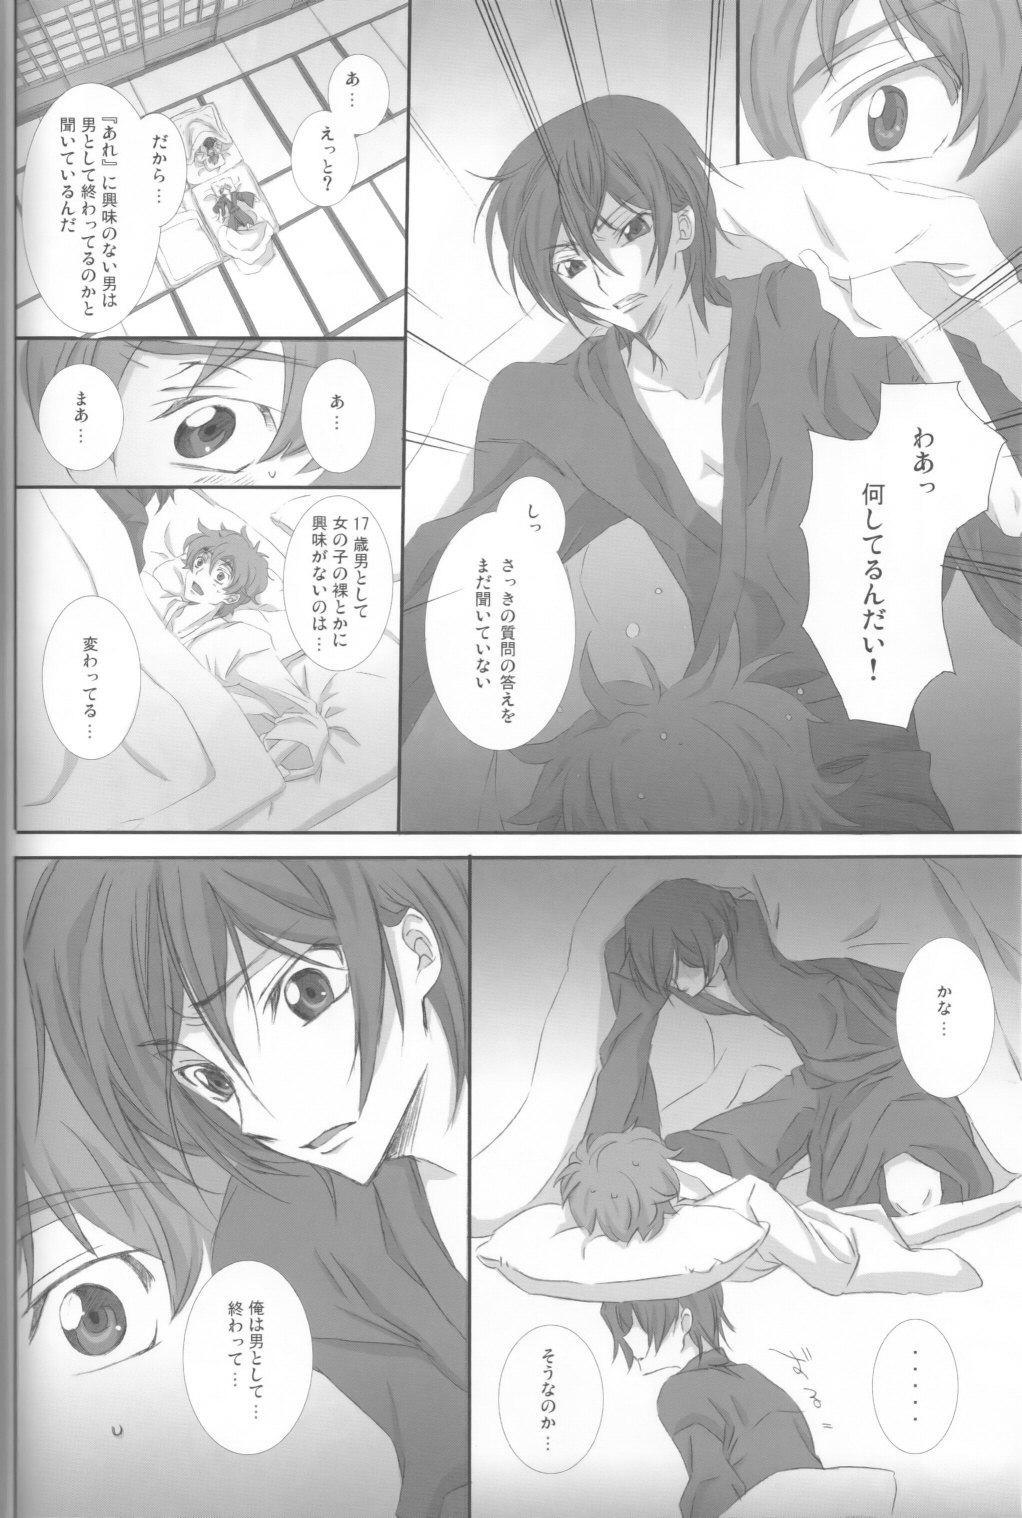 Orgy on・non・om - Code geass Pussyeating - Page 11